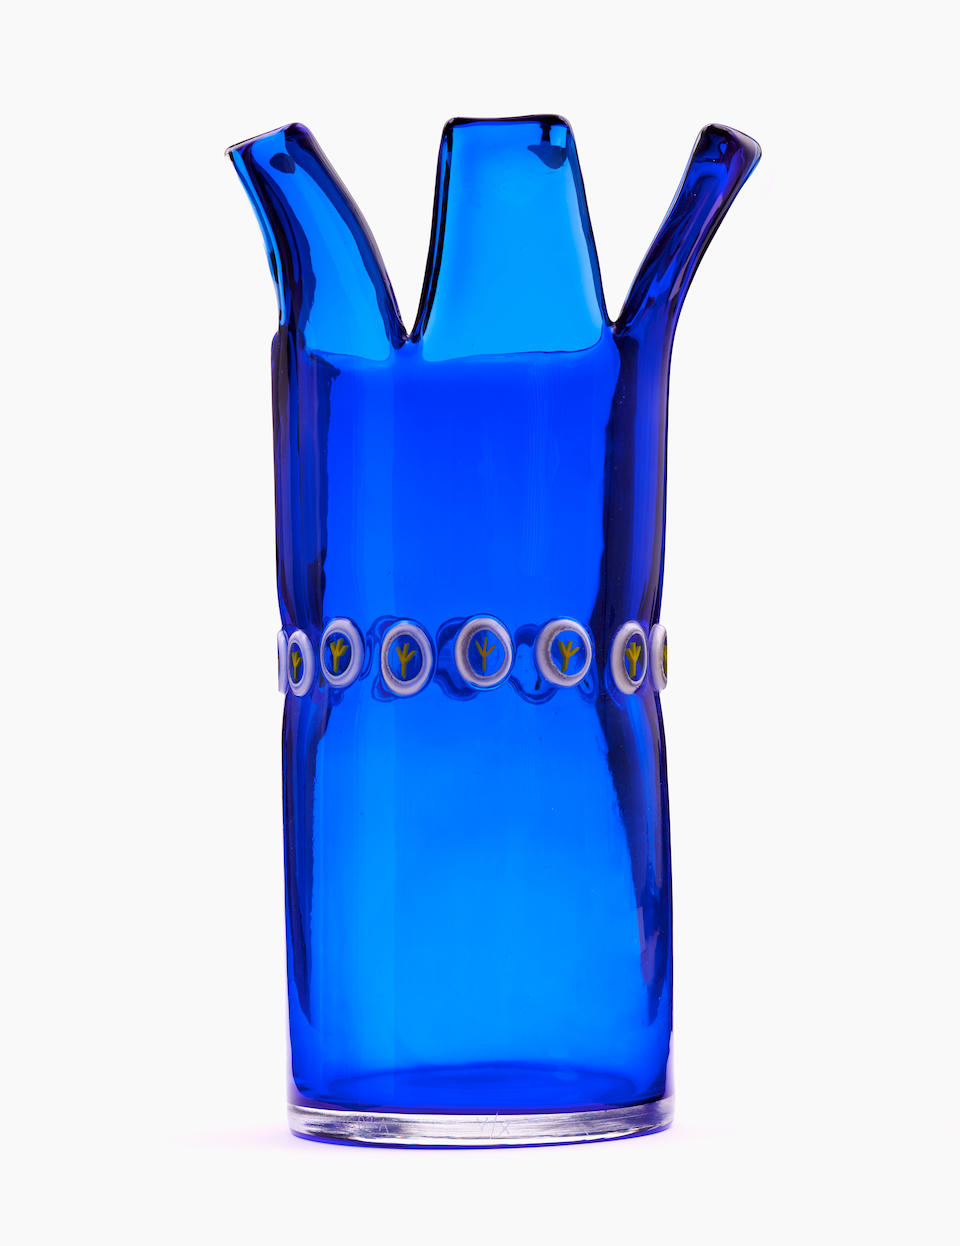 Riccardo Licata (1929-2014) Glifo Vase1995for Berengo Studio, numbered 5 from the edition of 10 blown glass, engraved markheight 15 1/4in (38.5cm)